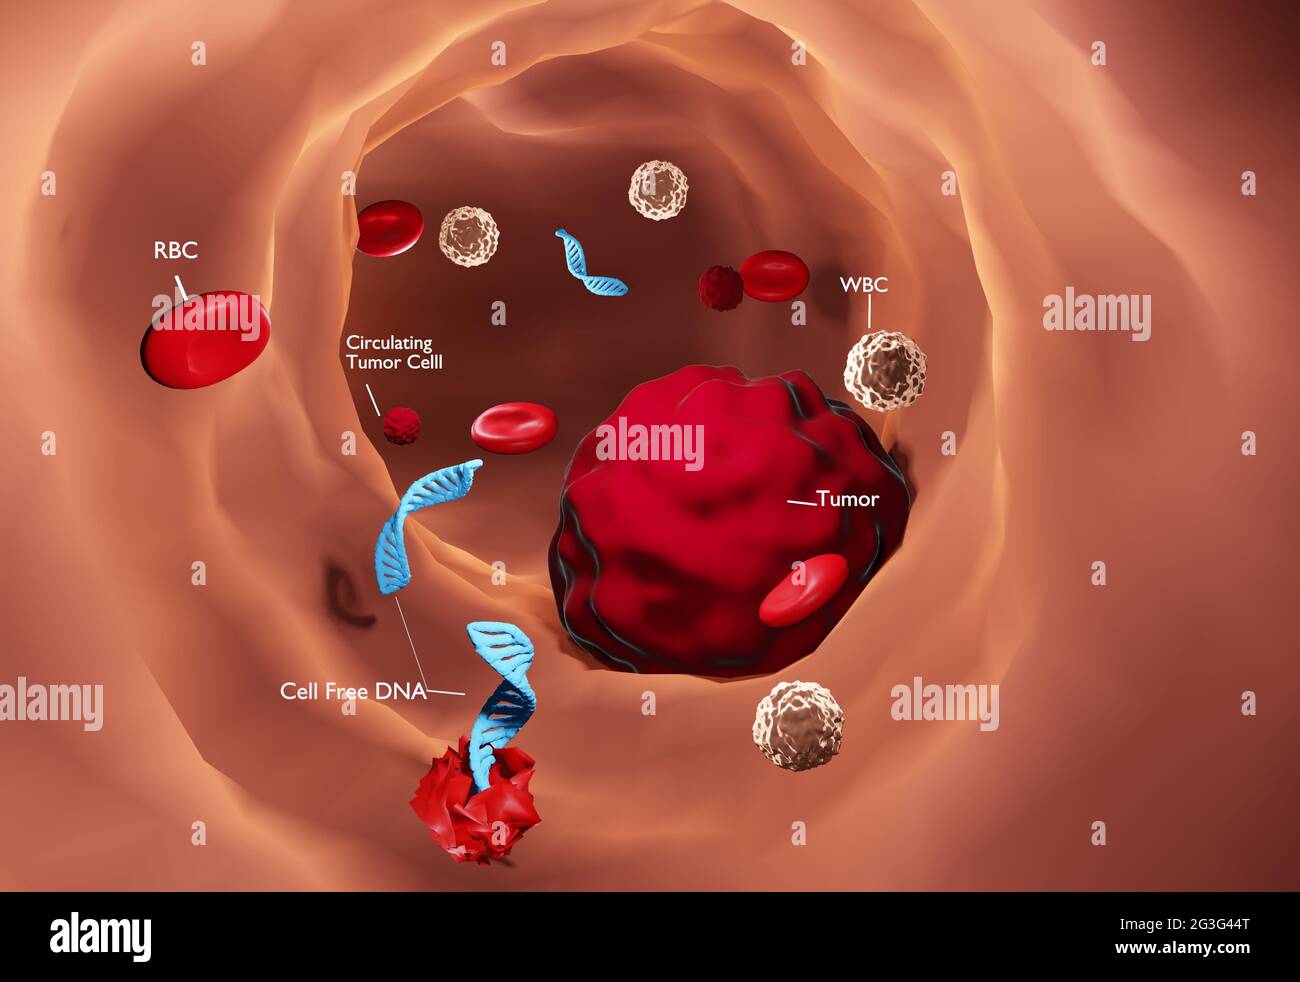 3D Illustration of tumour cells releasing the tumour cell free DNA into the blood stream. Stock Photo